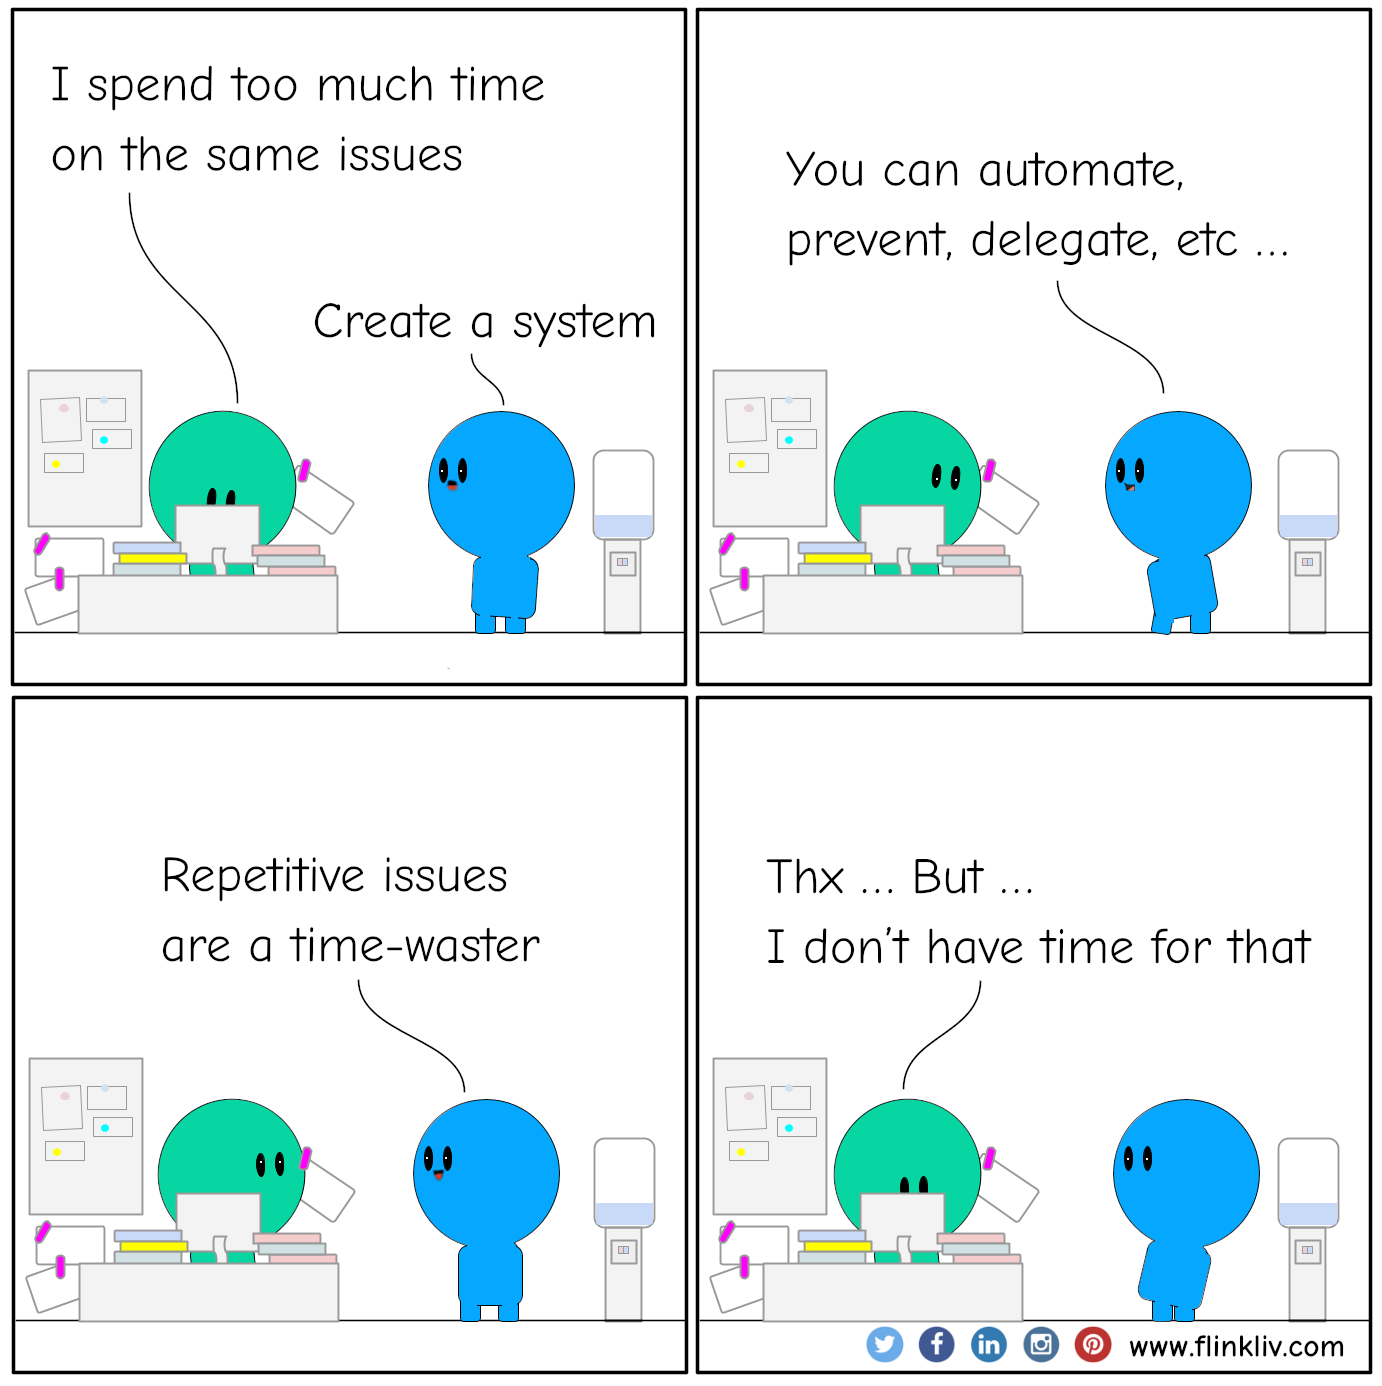 Conversation between A and B about adressing repetitive issues.
				A: I spend too much time on the same issues.
				B: Create a system.

				B: You can automate, prevent, delegate, etc.

				B: Repetitive issues are a time-waster.

				A: Thx, but I don't have time for that.
				